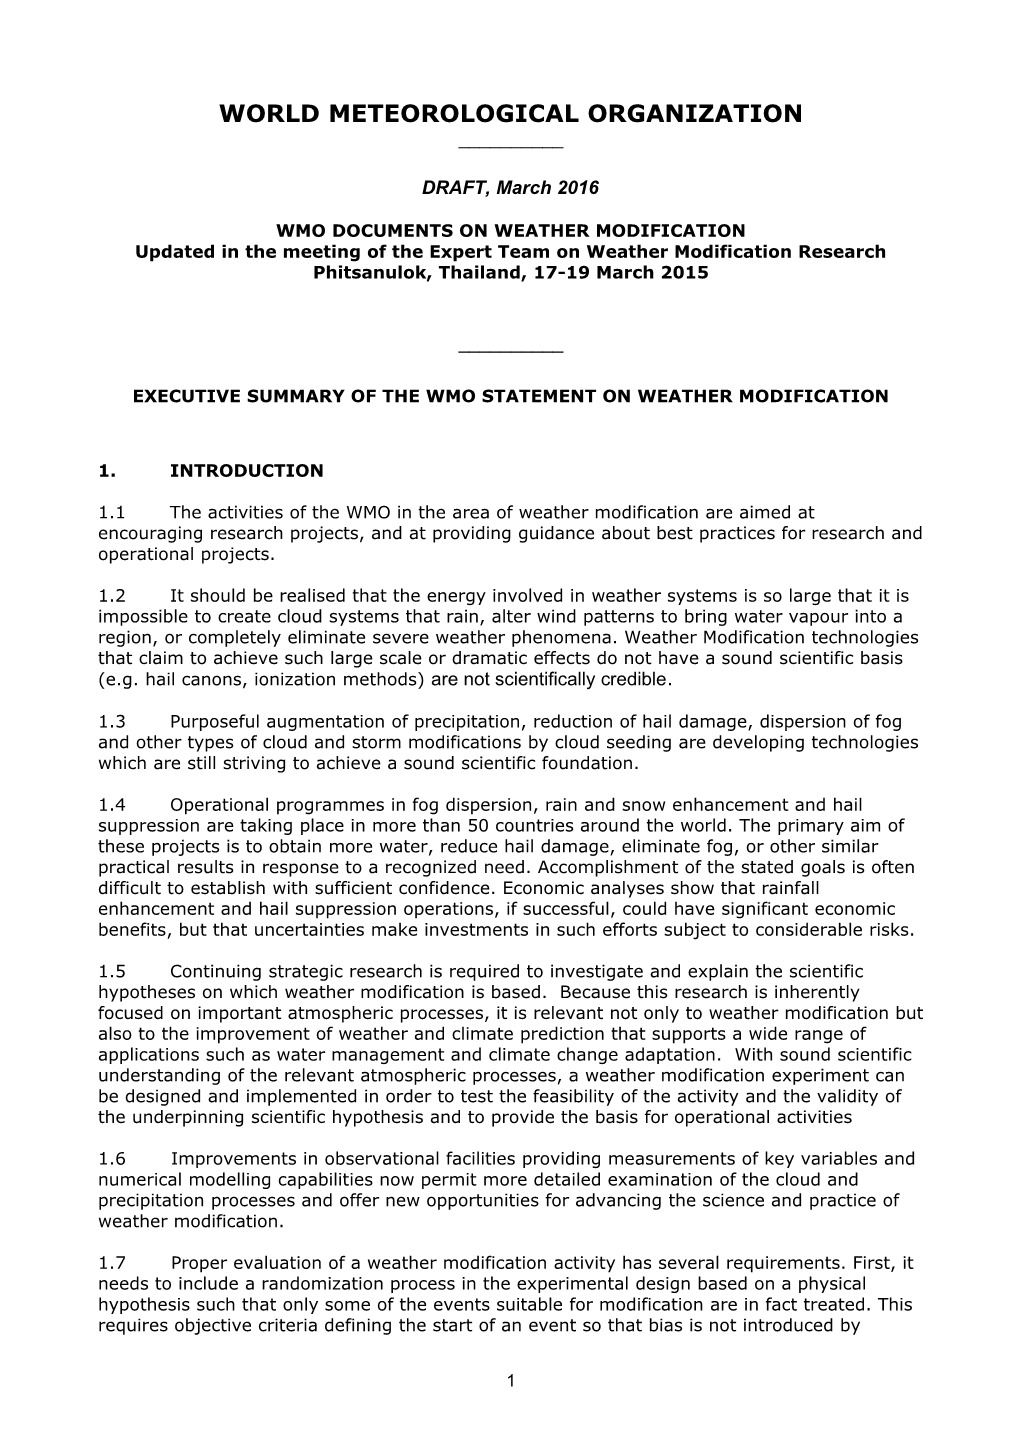 Wmo Documents on Weather Modification